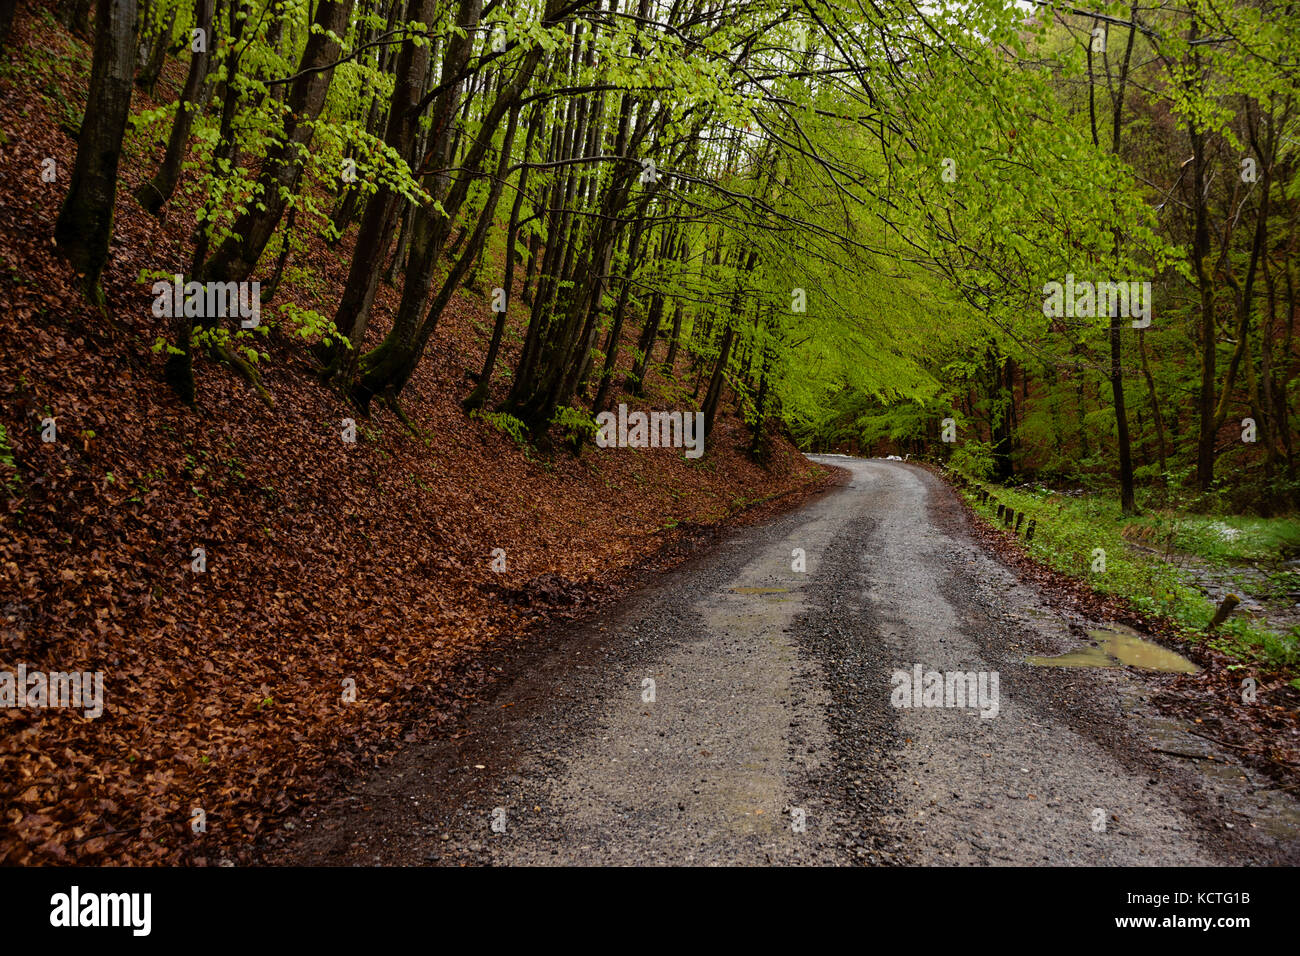 Diminishing Perspective Of Dirt Road Surrounded By Forest On Rainy Day During Autumn Stock Photo